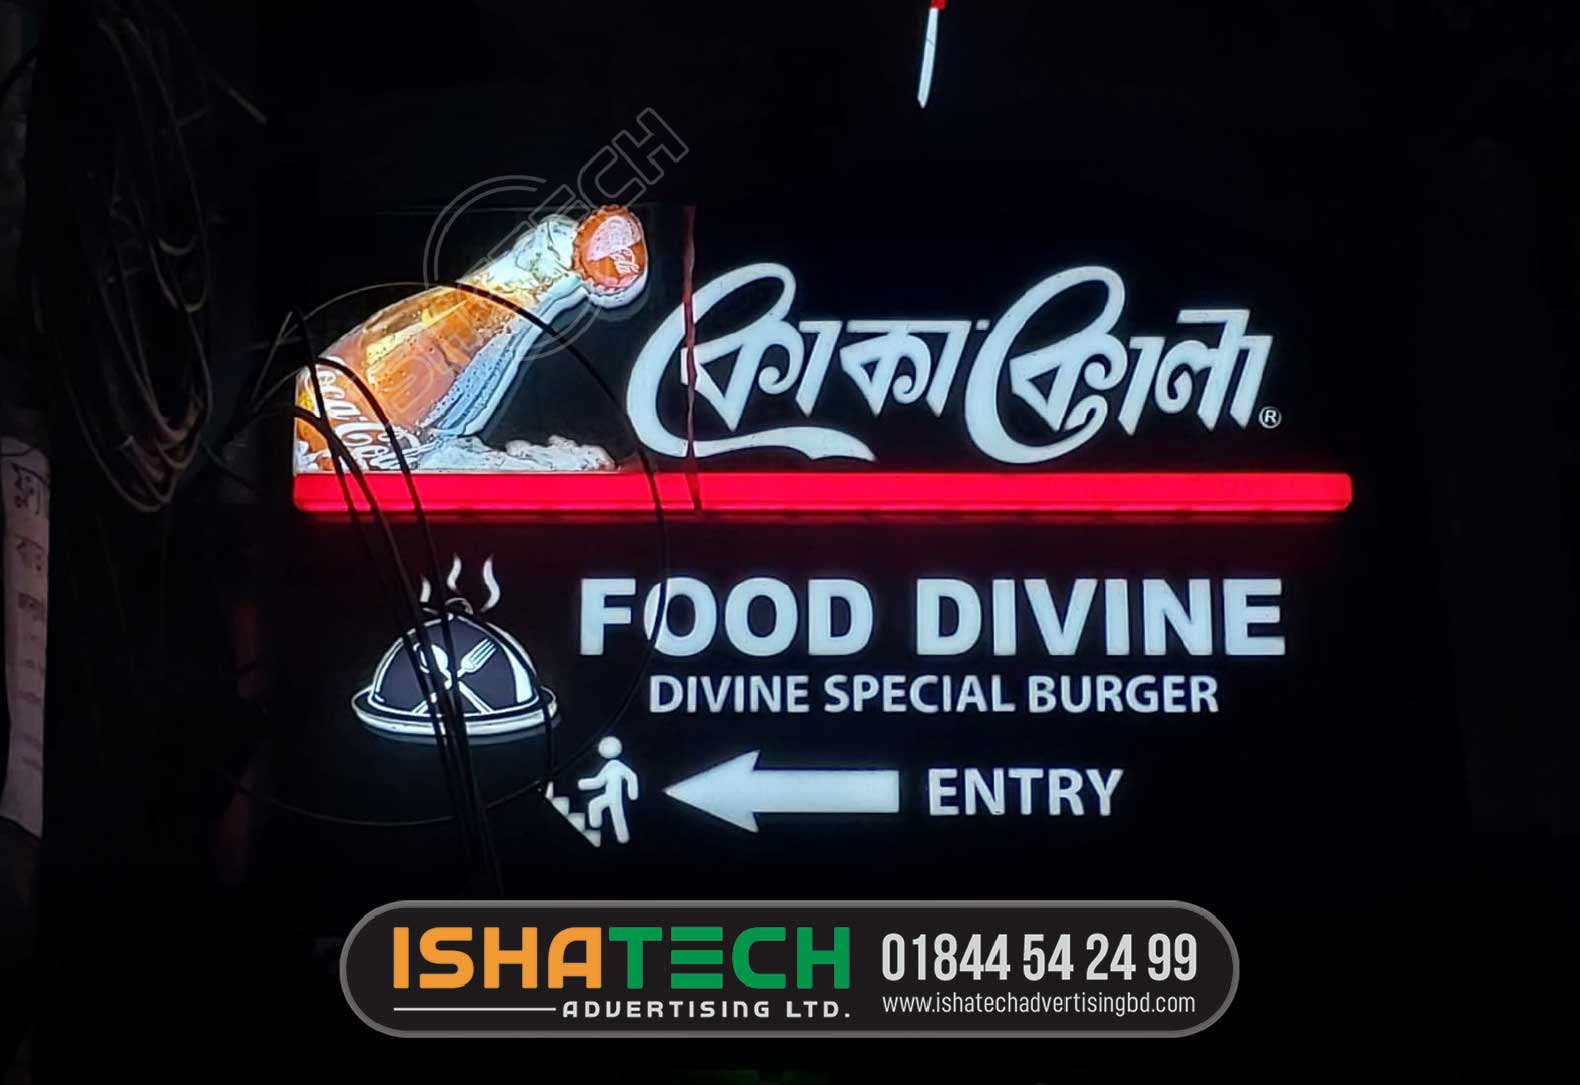 FOOD DIVINE RESTAURANT AND COCA COLA LETTER AND LOGO SIGNAGE BY ACRYLIC